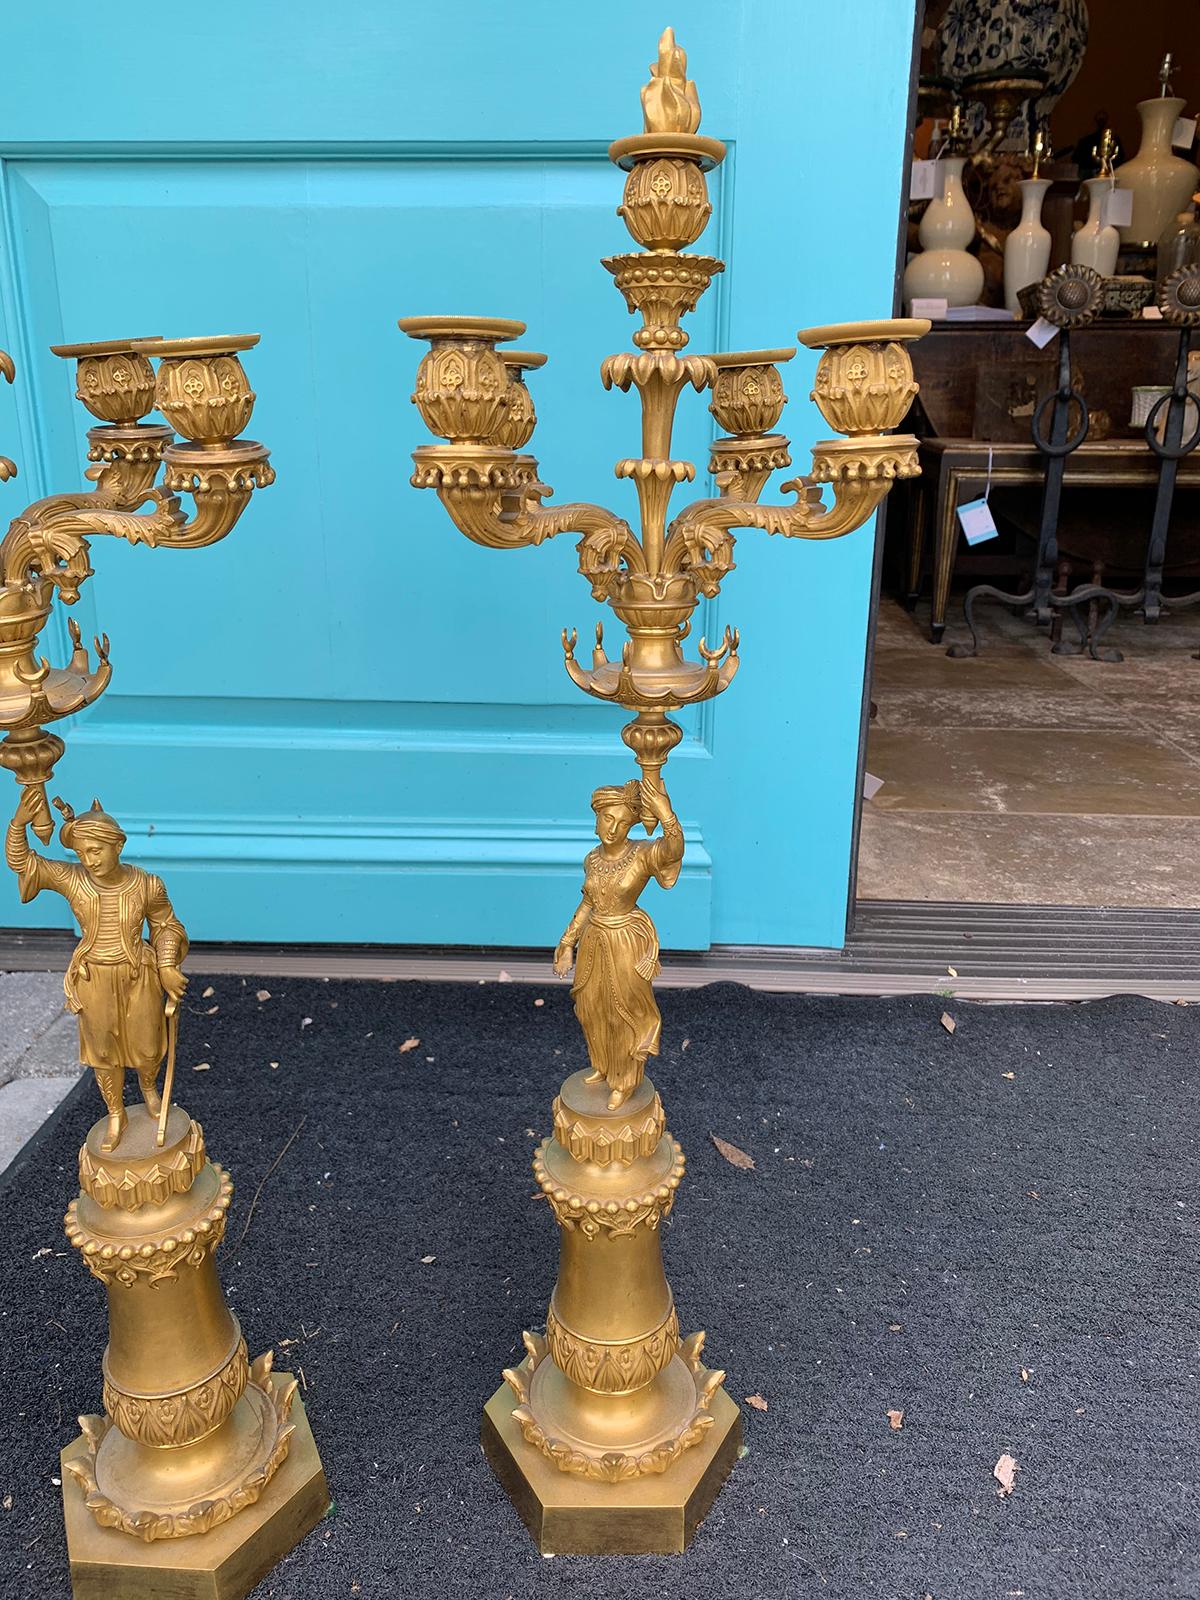 Pair of 19th Century Regency Style Gilt Bronze Four Arm Figural Candelabras For Sale 2